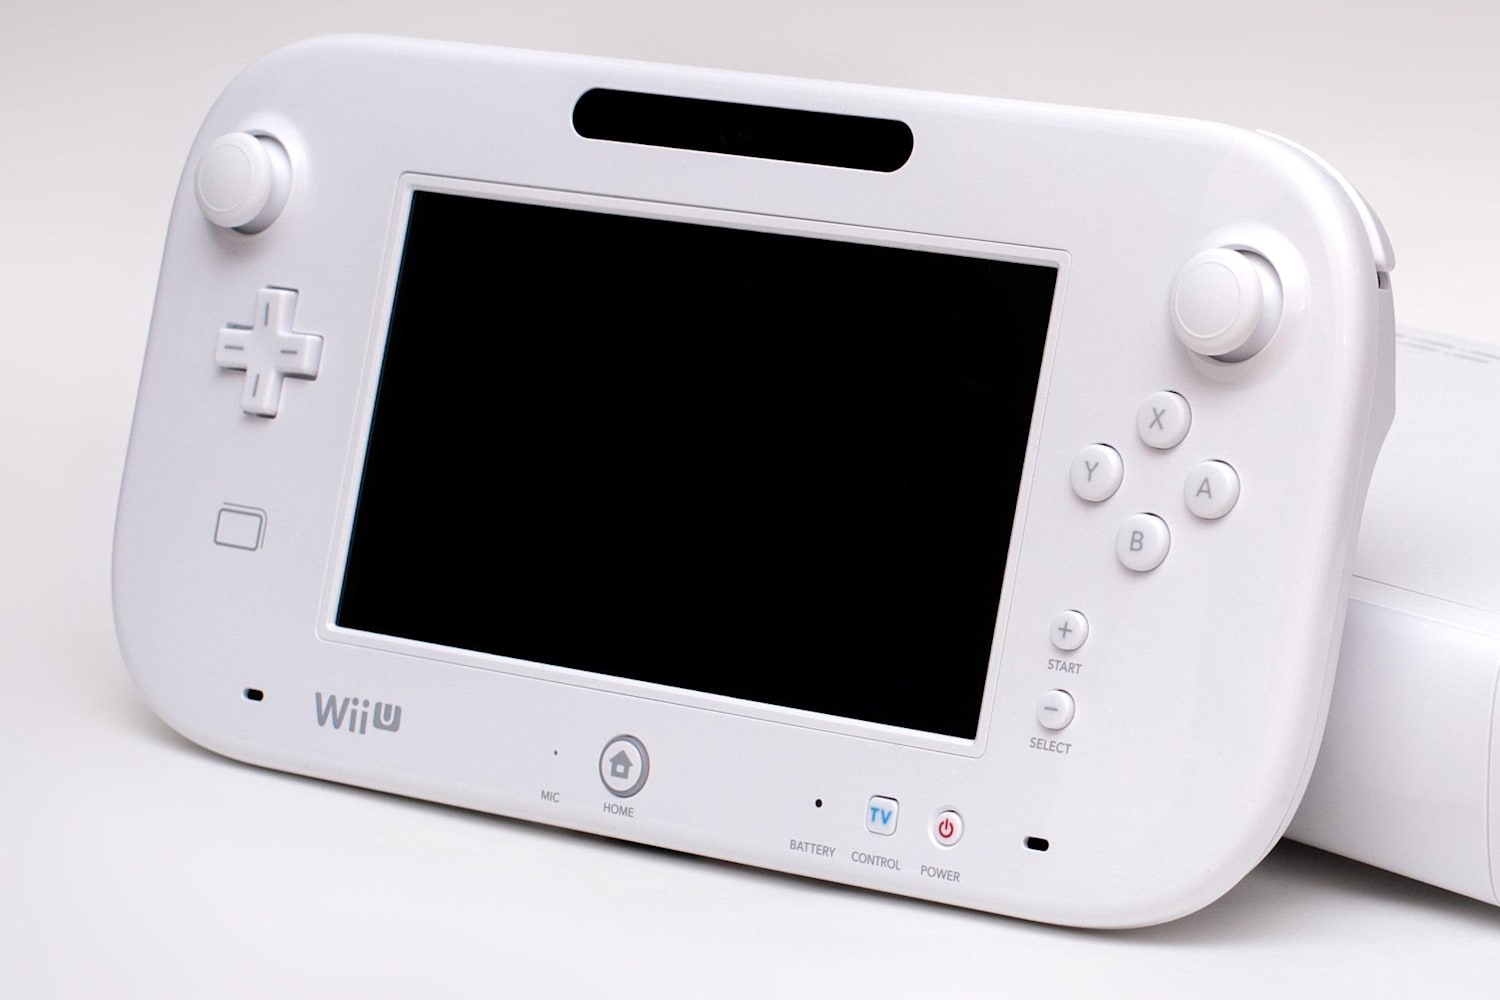 how to play wii u games